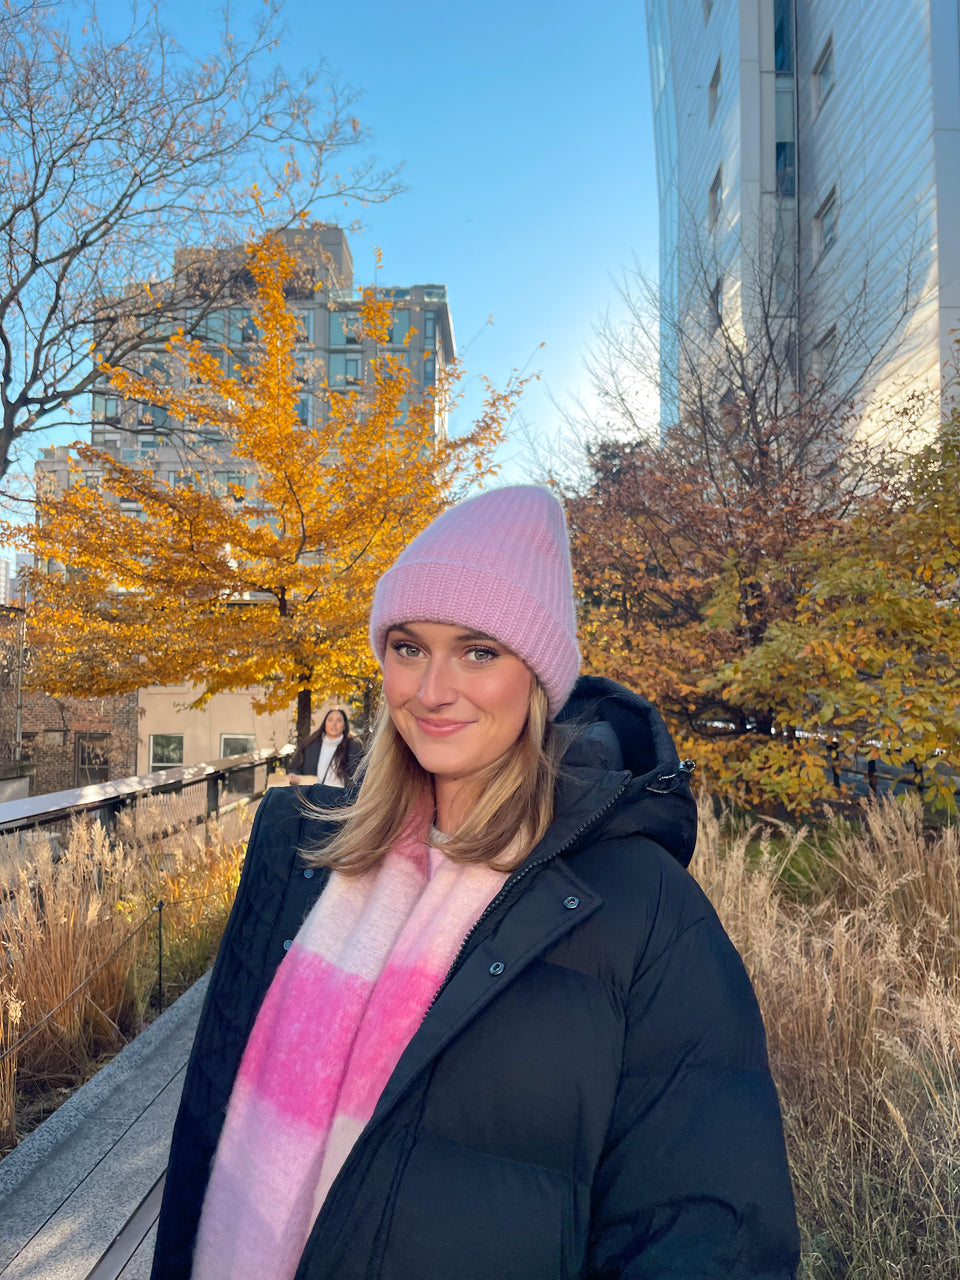 Pure Pink Cashmere Beanie